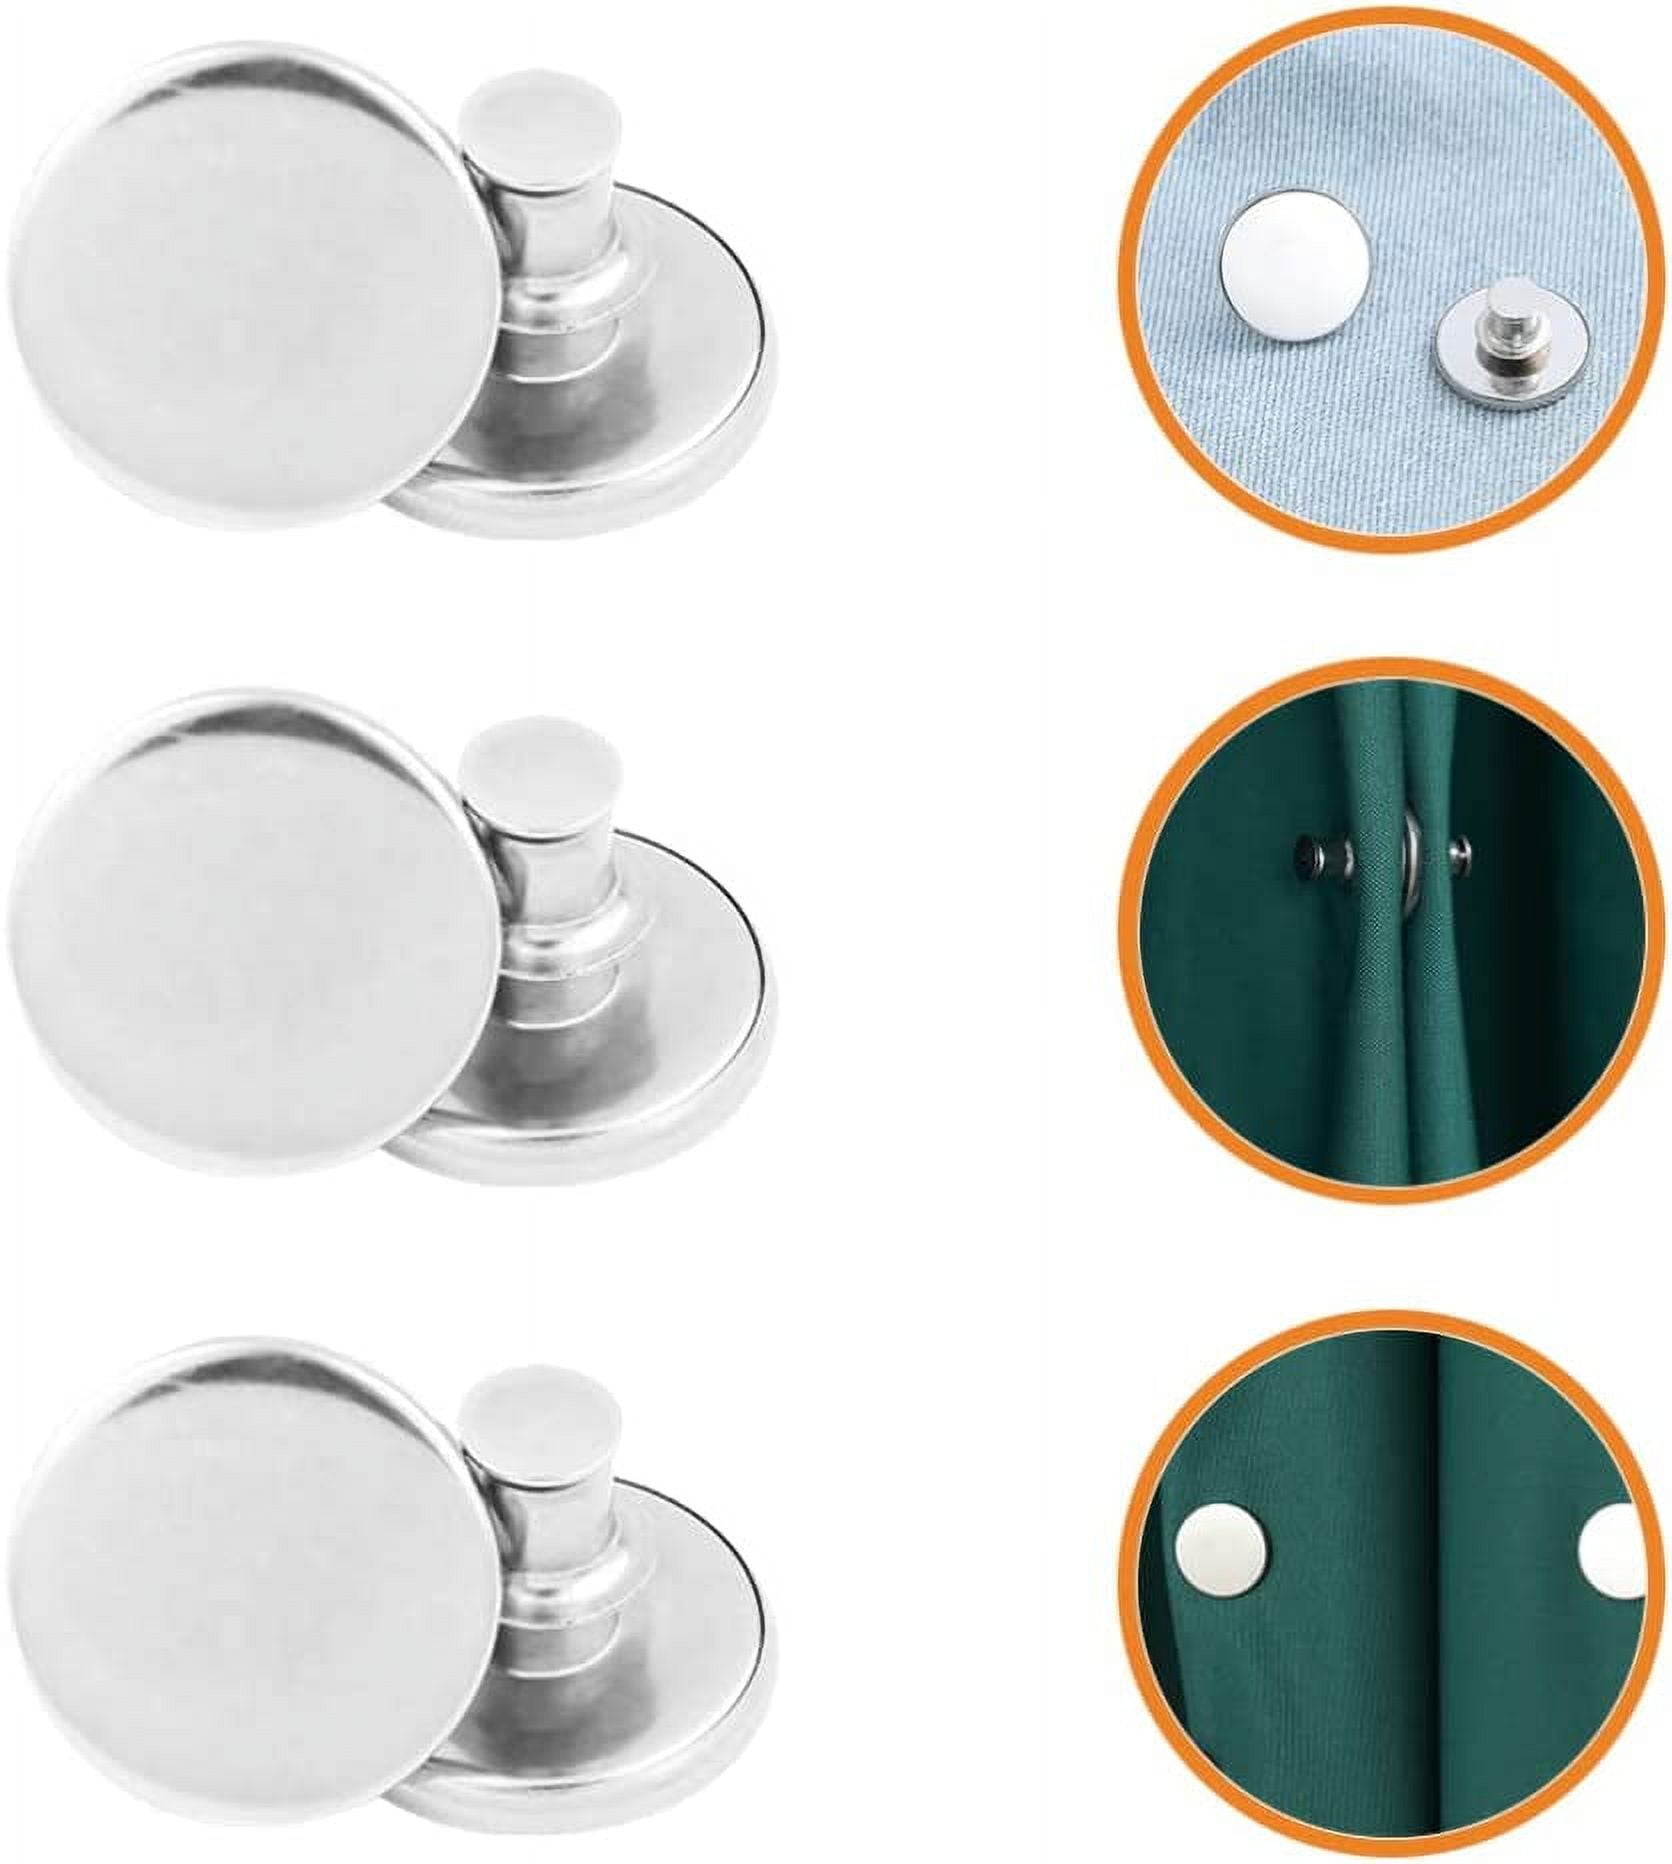 Jcabin Curtain Magnets Closure 6 Pairs, Curtain Weights Magnets Button to  Keep Curtain Closed Prevents Light Leakage and Curtains from Being Blown